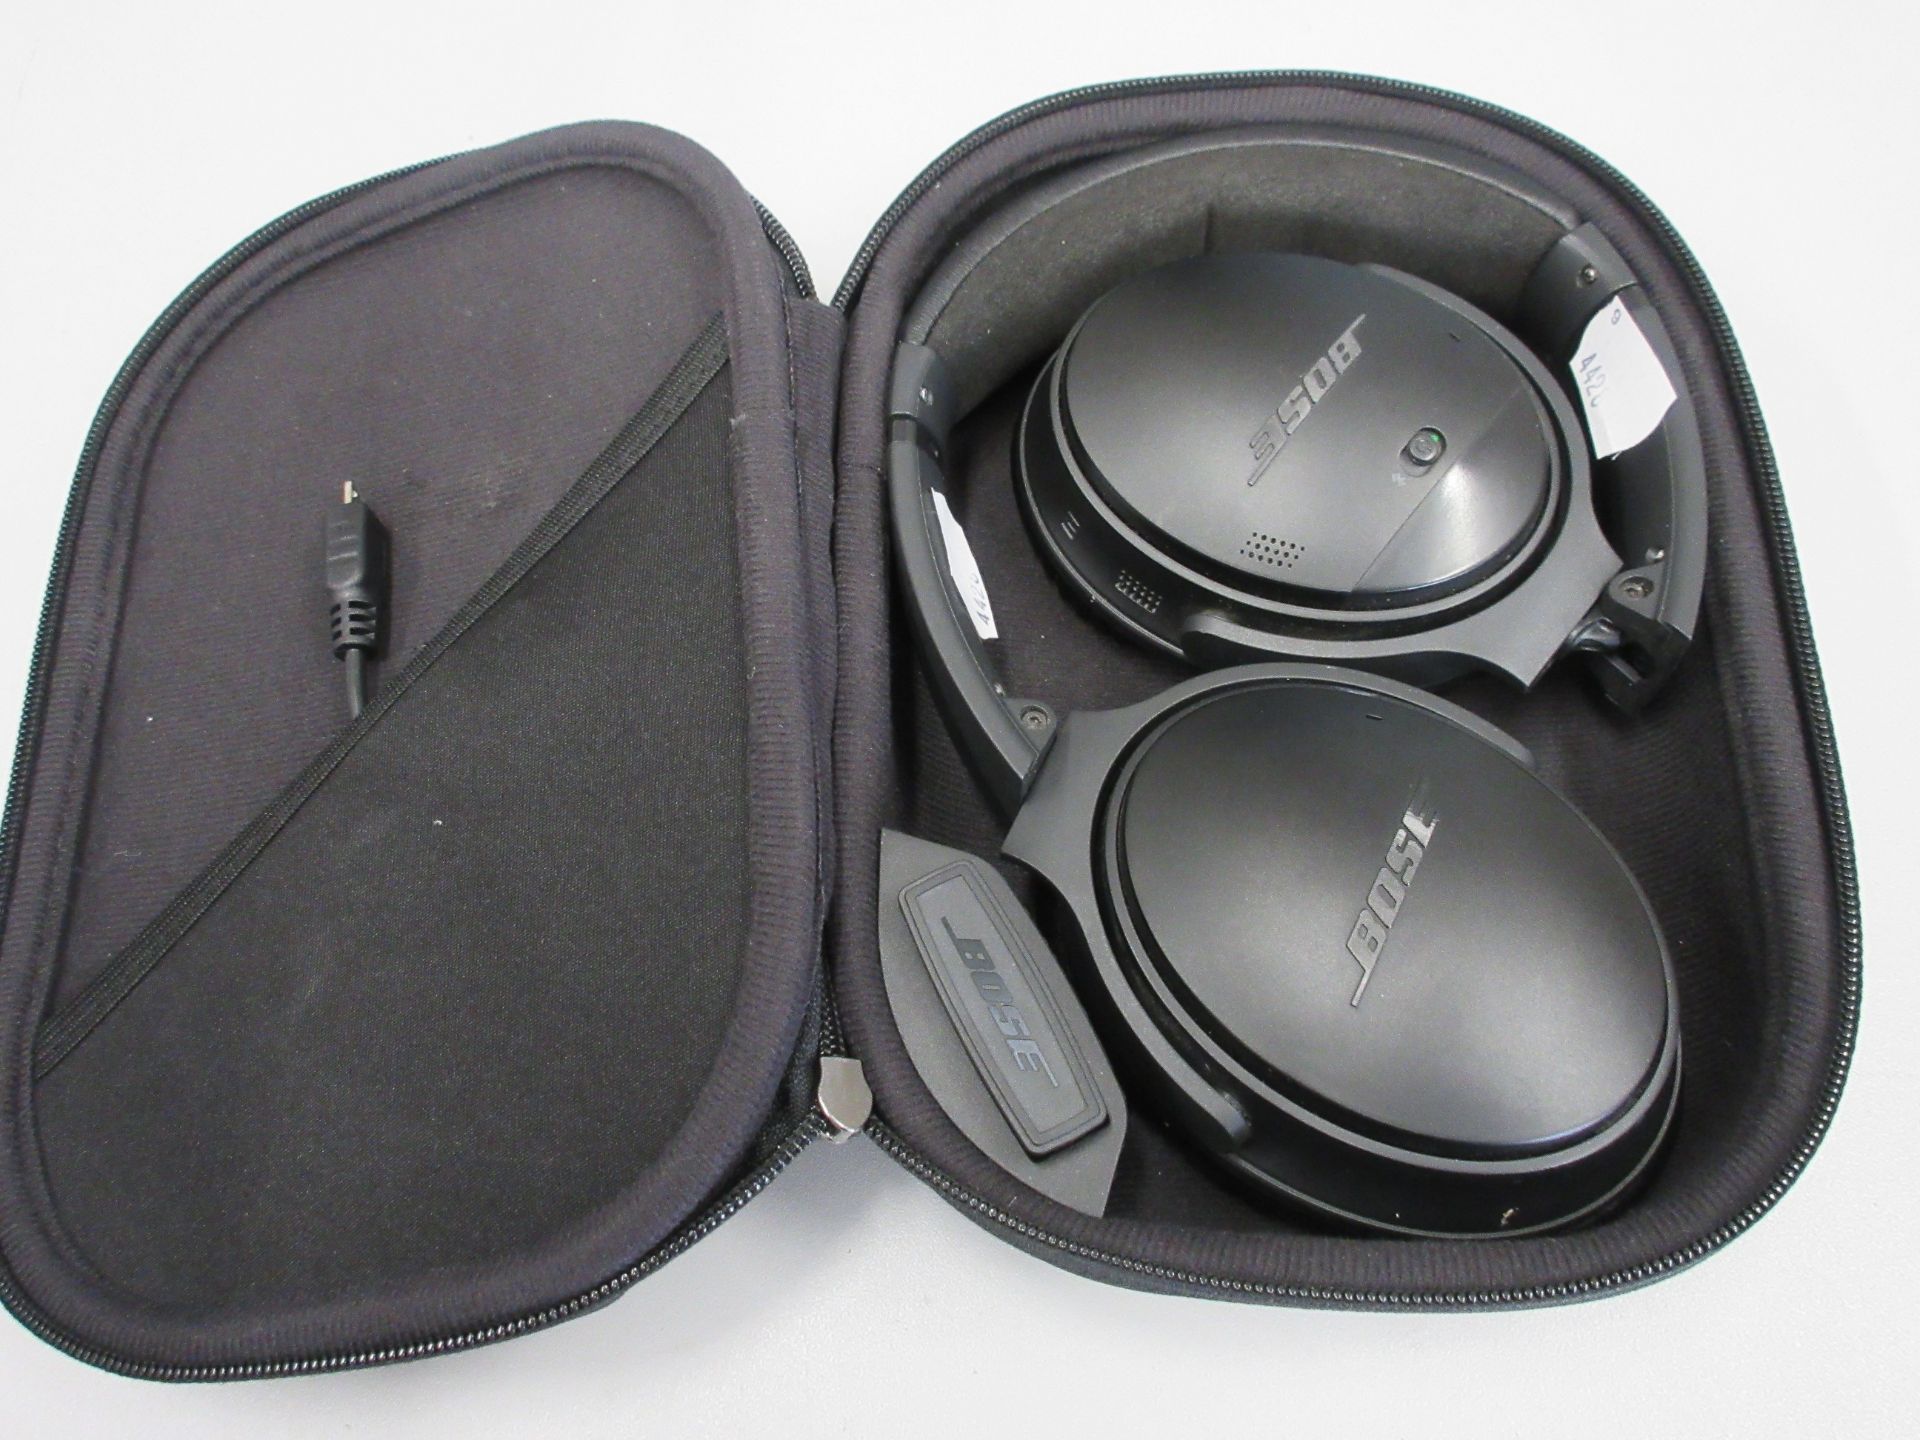 A pair of pre-owned Bose QuietComfort 35 (Series I) Noise Cancelling Wireless Headphones in Black